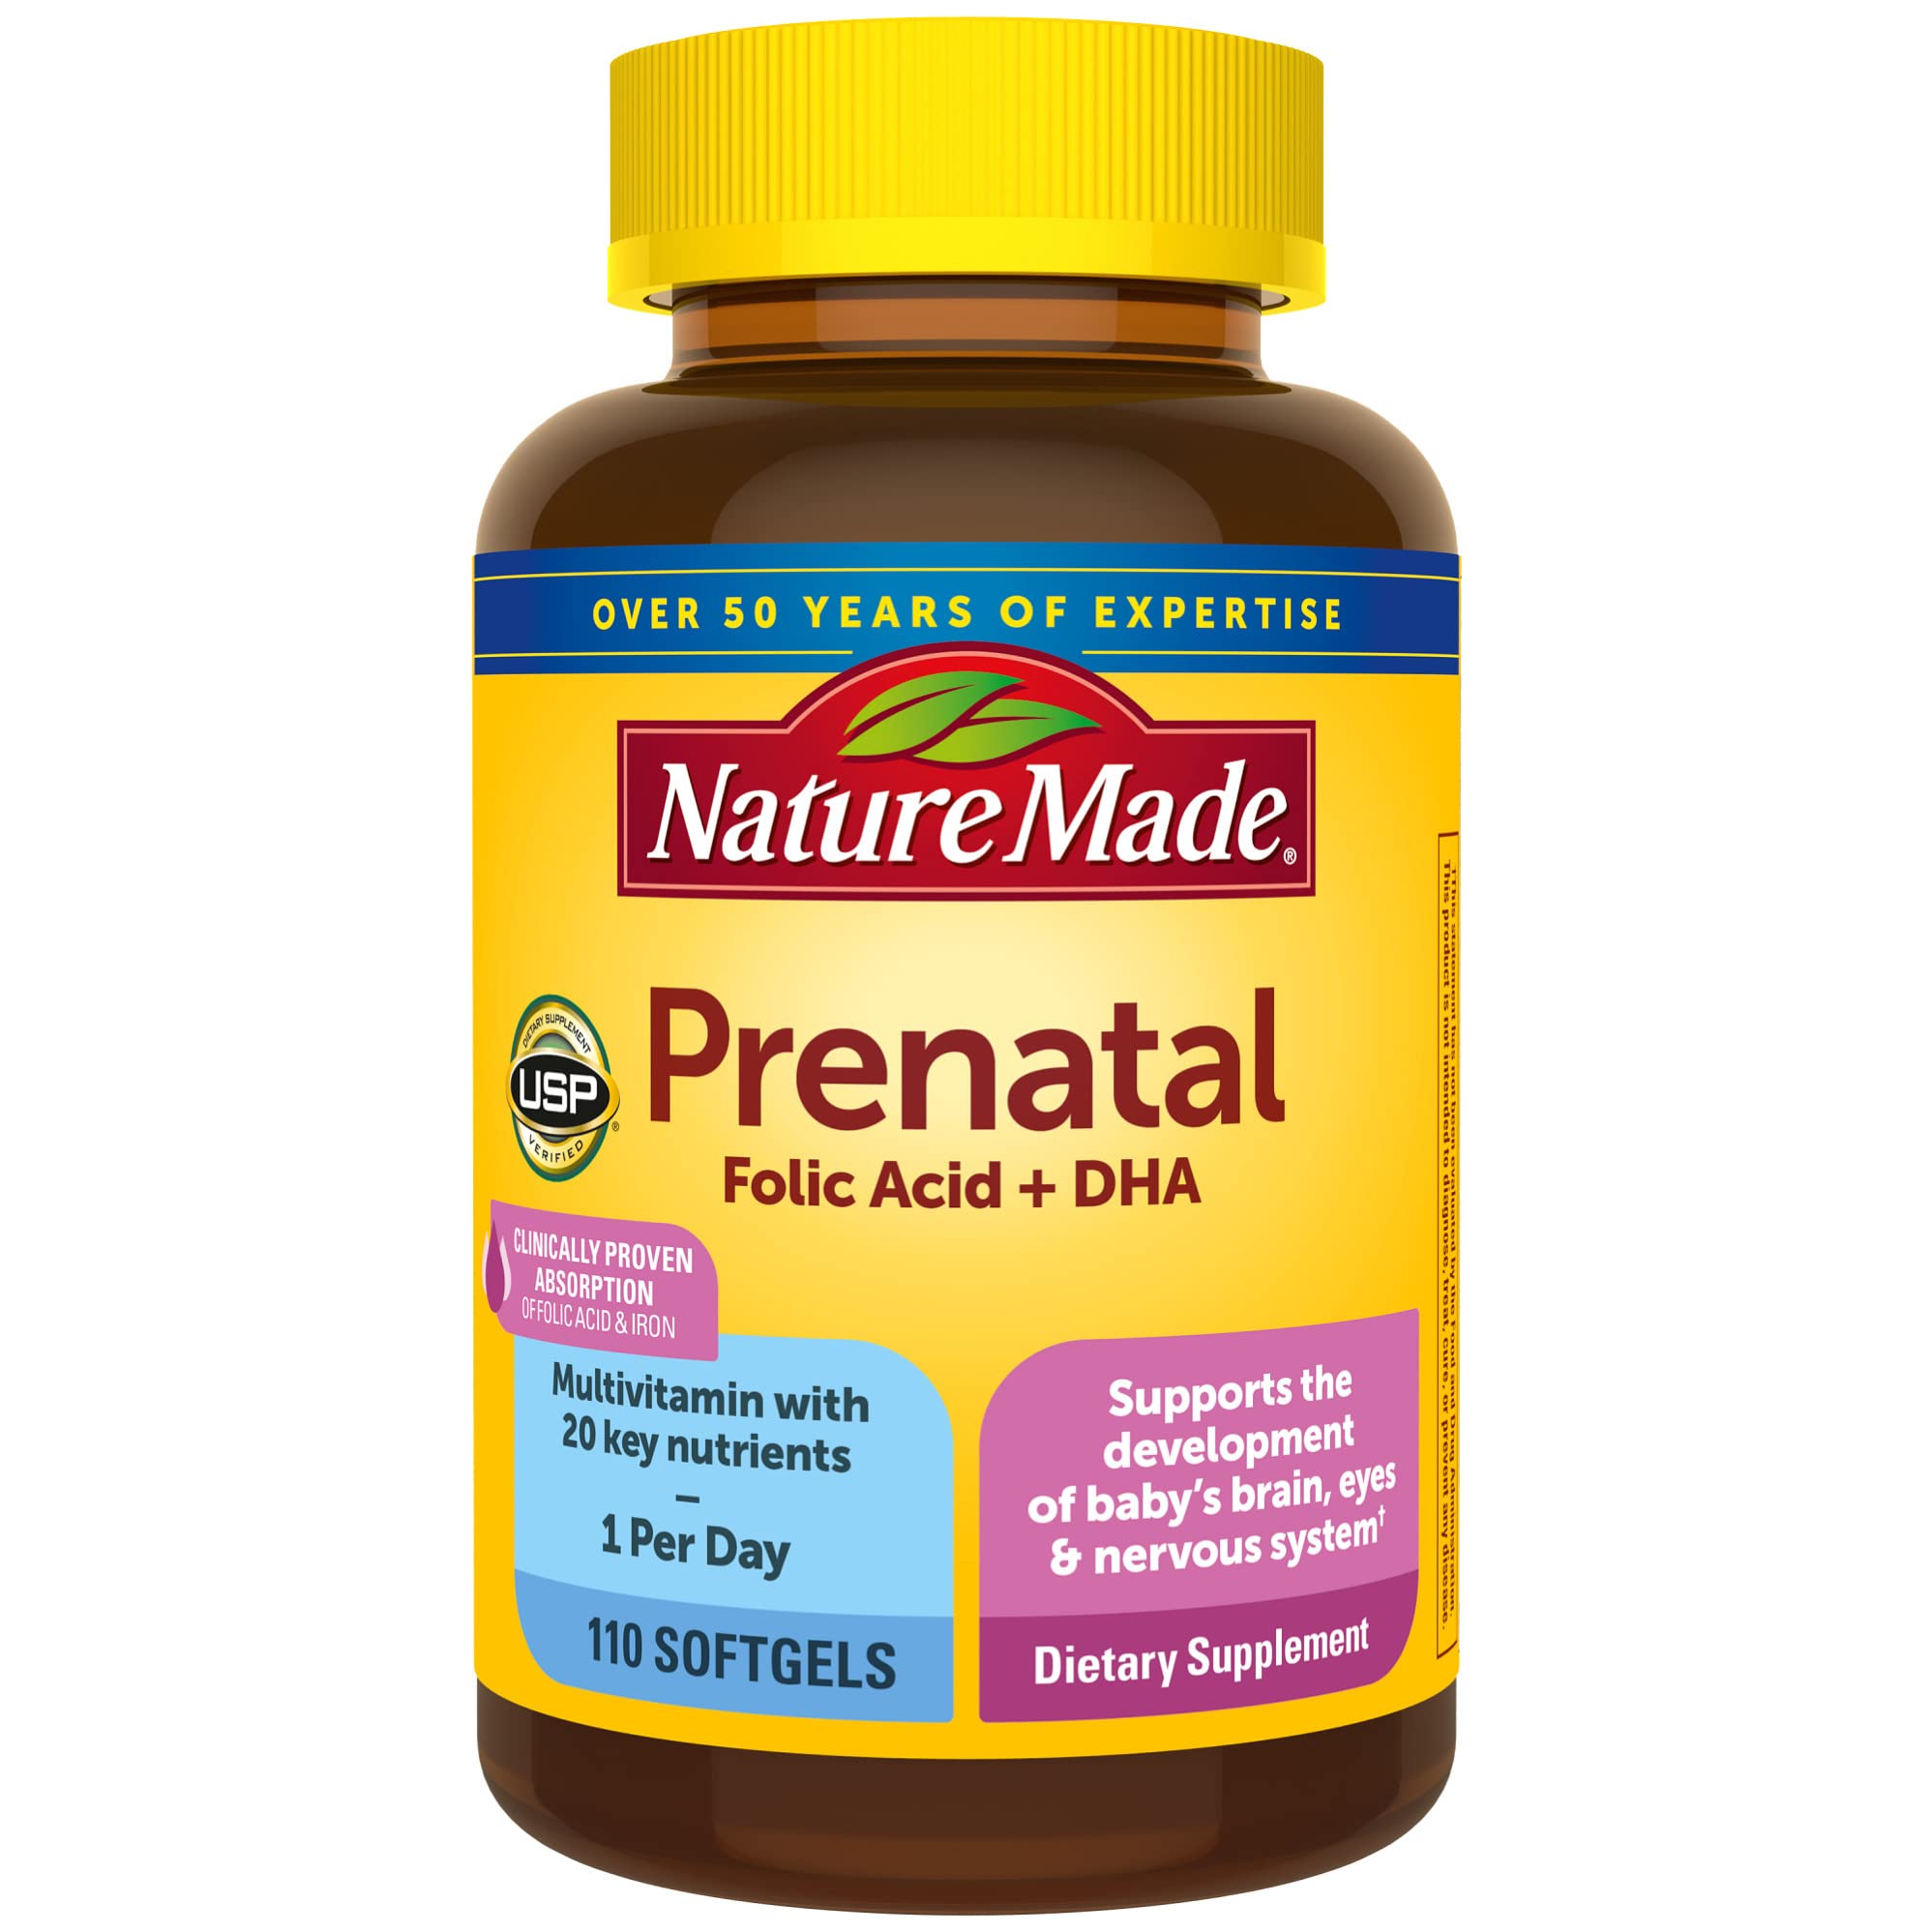 Nature Made Prenatal with Folic Acid + DHA, Prenatal Vitamin and Mineral Supplement for Daily Nutritional Support, 110 Softgels, 110 Day Supply